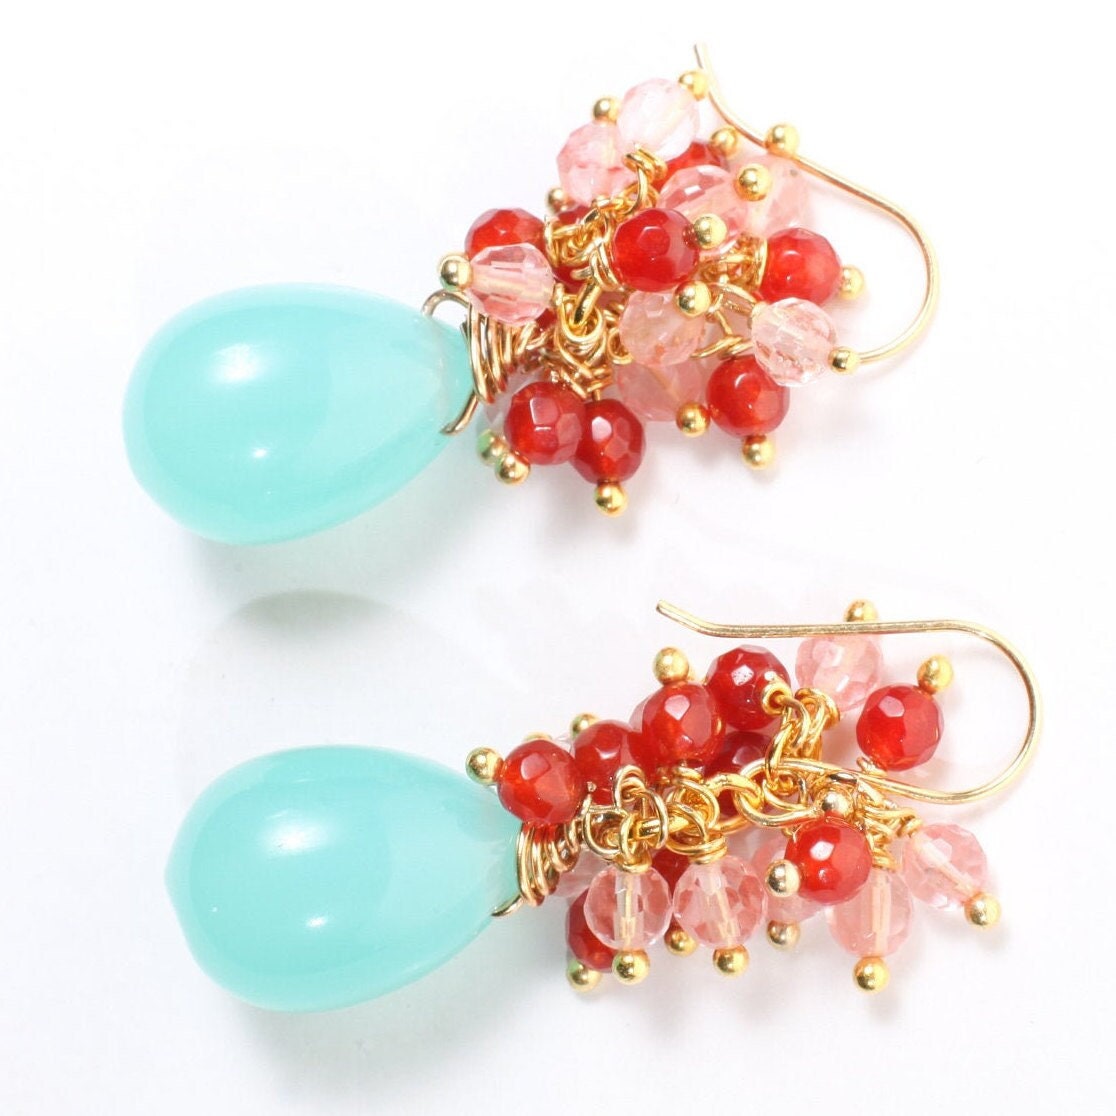 SALE..Aqua Chalcedony 12x16mm Large smooth Drop Cluster Earrings in Gold Vermeil, Gold Over Sterling Silver Earrings